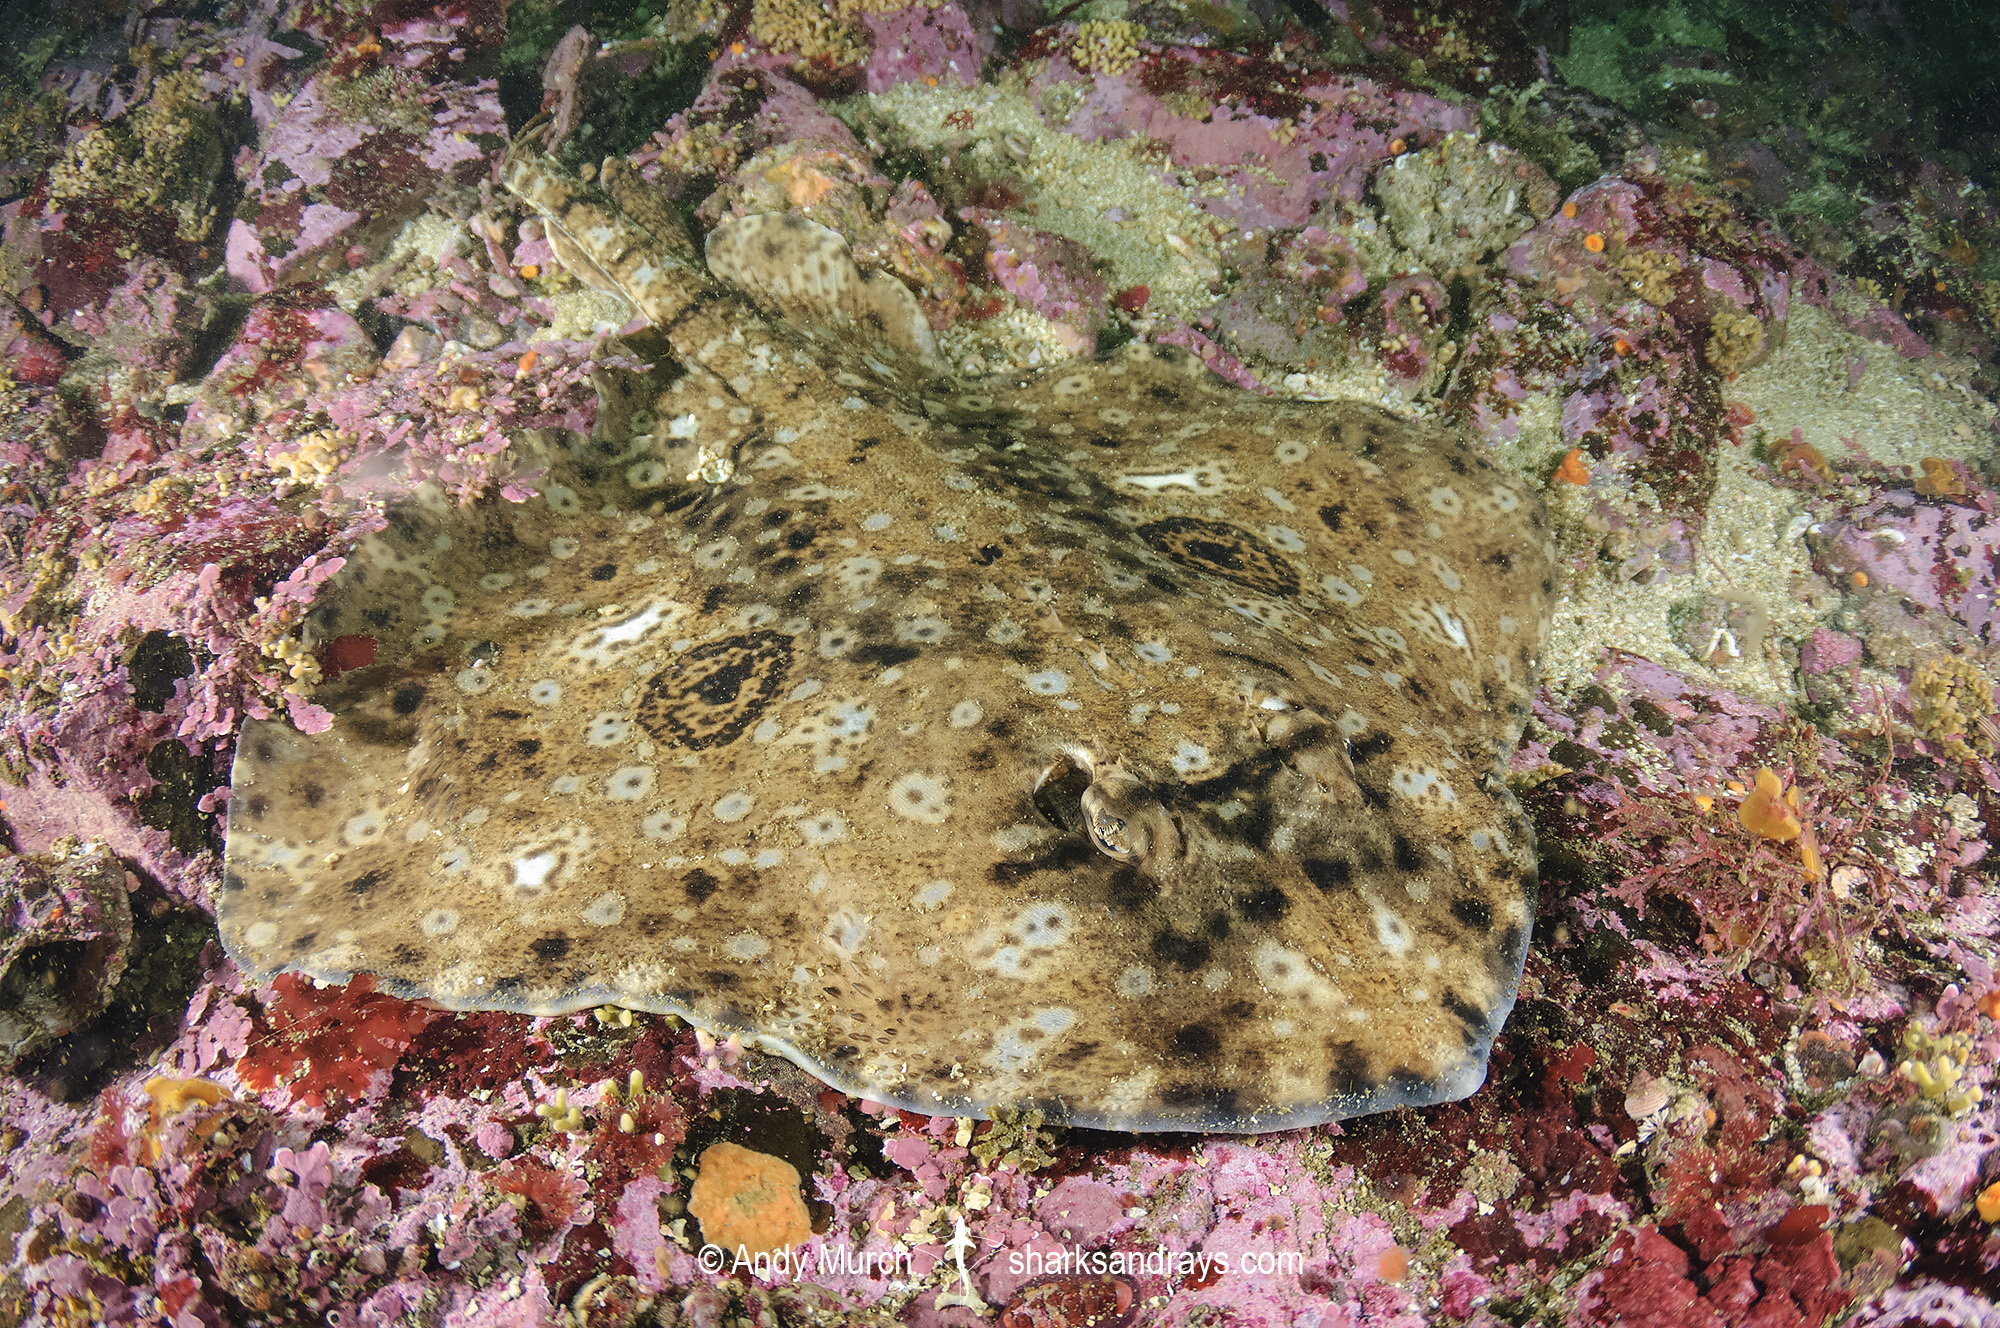 Pacific Starry Skate